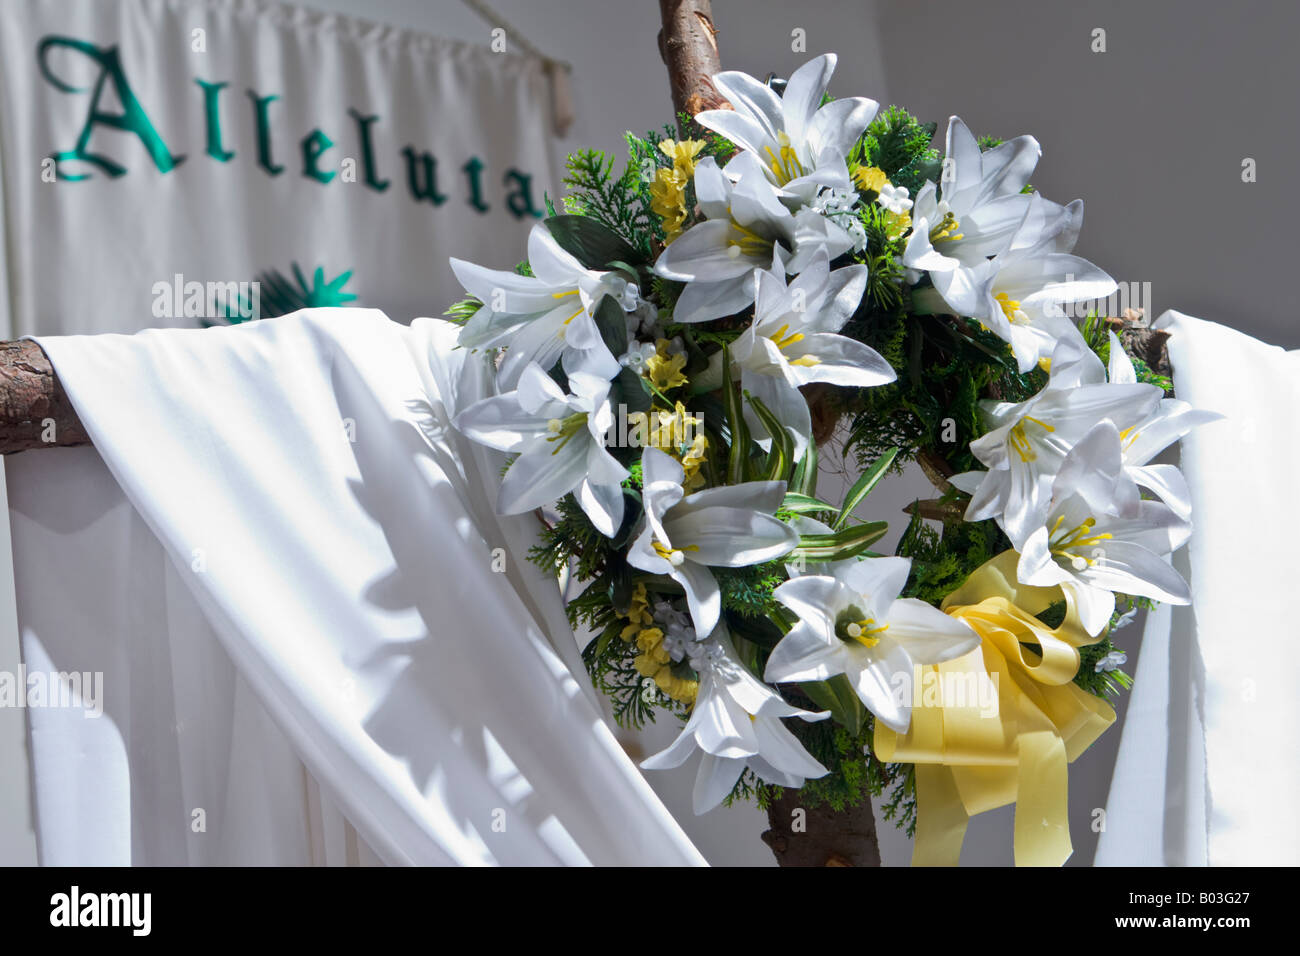 Easter decorations, robe and lilies, from Lutheran church Stock Photo